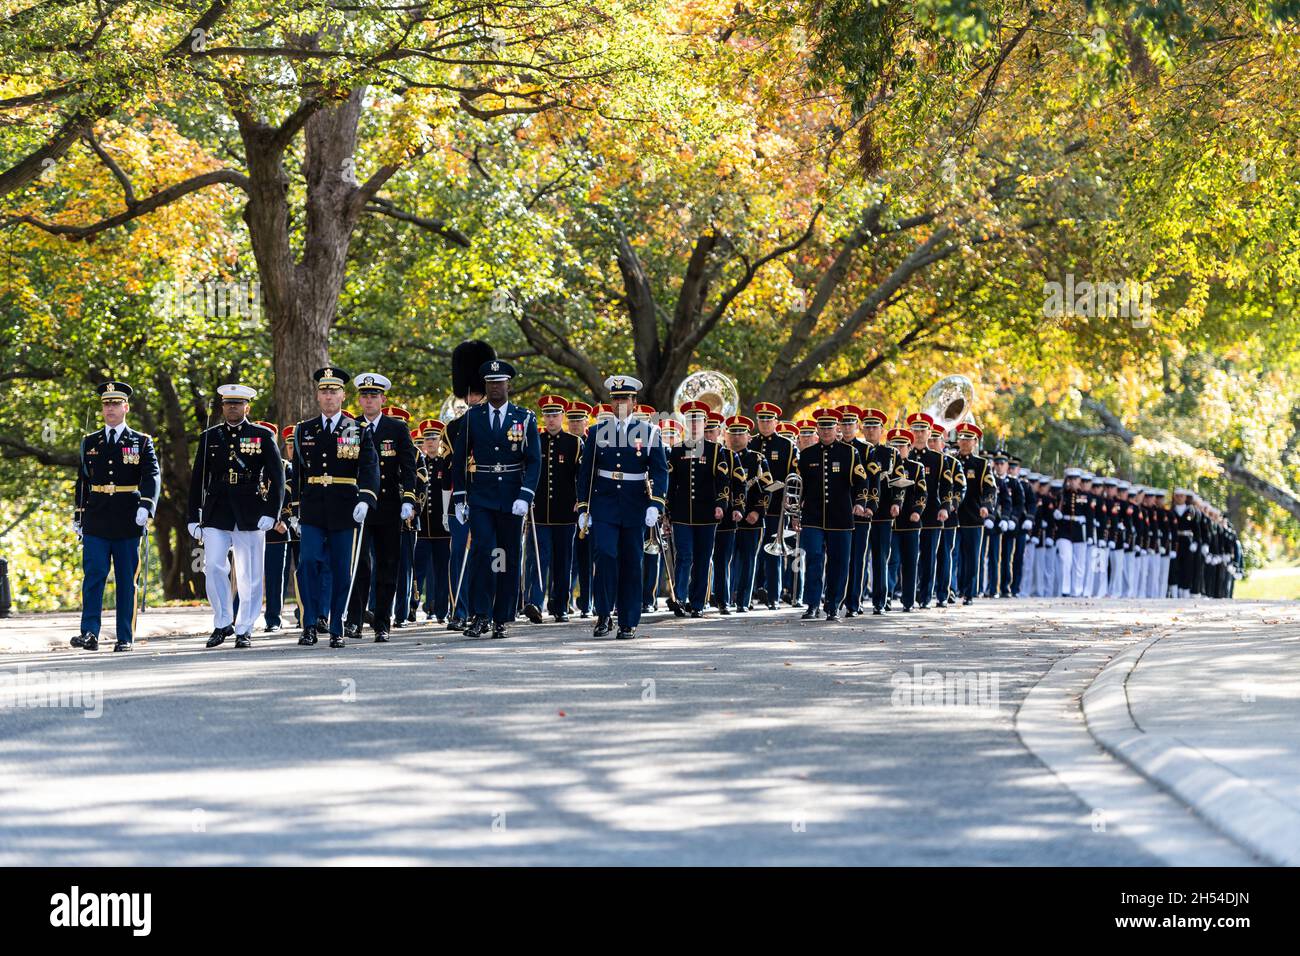 Arlington, United States. 05th Nov, 2021. U.S. Armed Forces Honor Guard, the 3d Army Infantry Regiment, Army Band and Old Guard Caisson Platoon march in a funeral procession behind the flag draped casket of former U.S. Secretary of State Gen. Colin Powell during the full honors funeral at Arlington National Cemetery, November 5, 2021 in Arlington, Virginia. Credit: Sgt. Zachery Perkins/DOD Photo/Alamy Live News Stock Photo